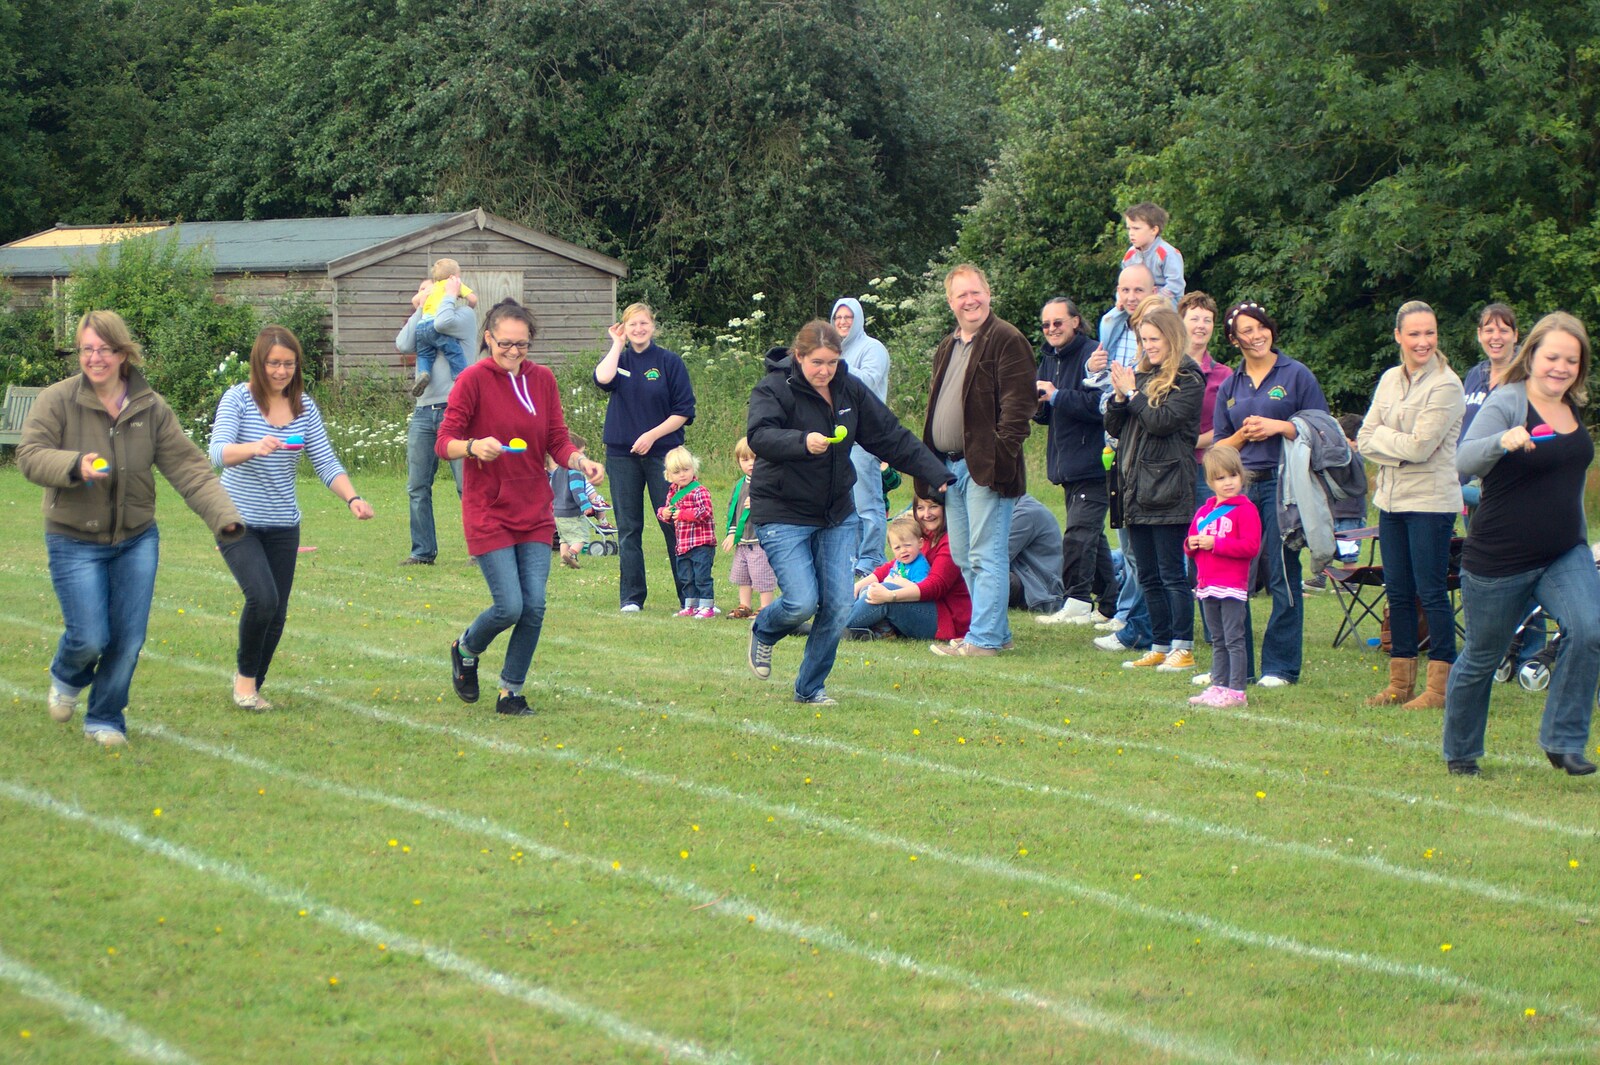 Isobel is off in the Mothers' race from Fred's First Sports Day, Palgrave, Suffolk - 18th June 2011